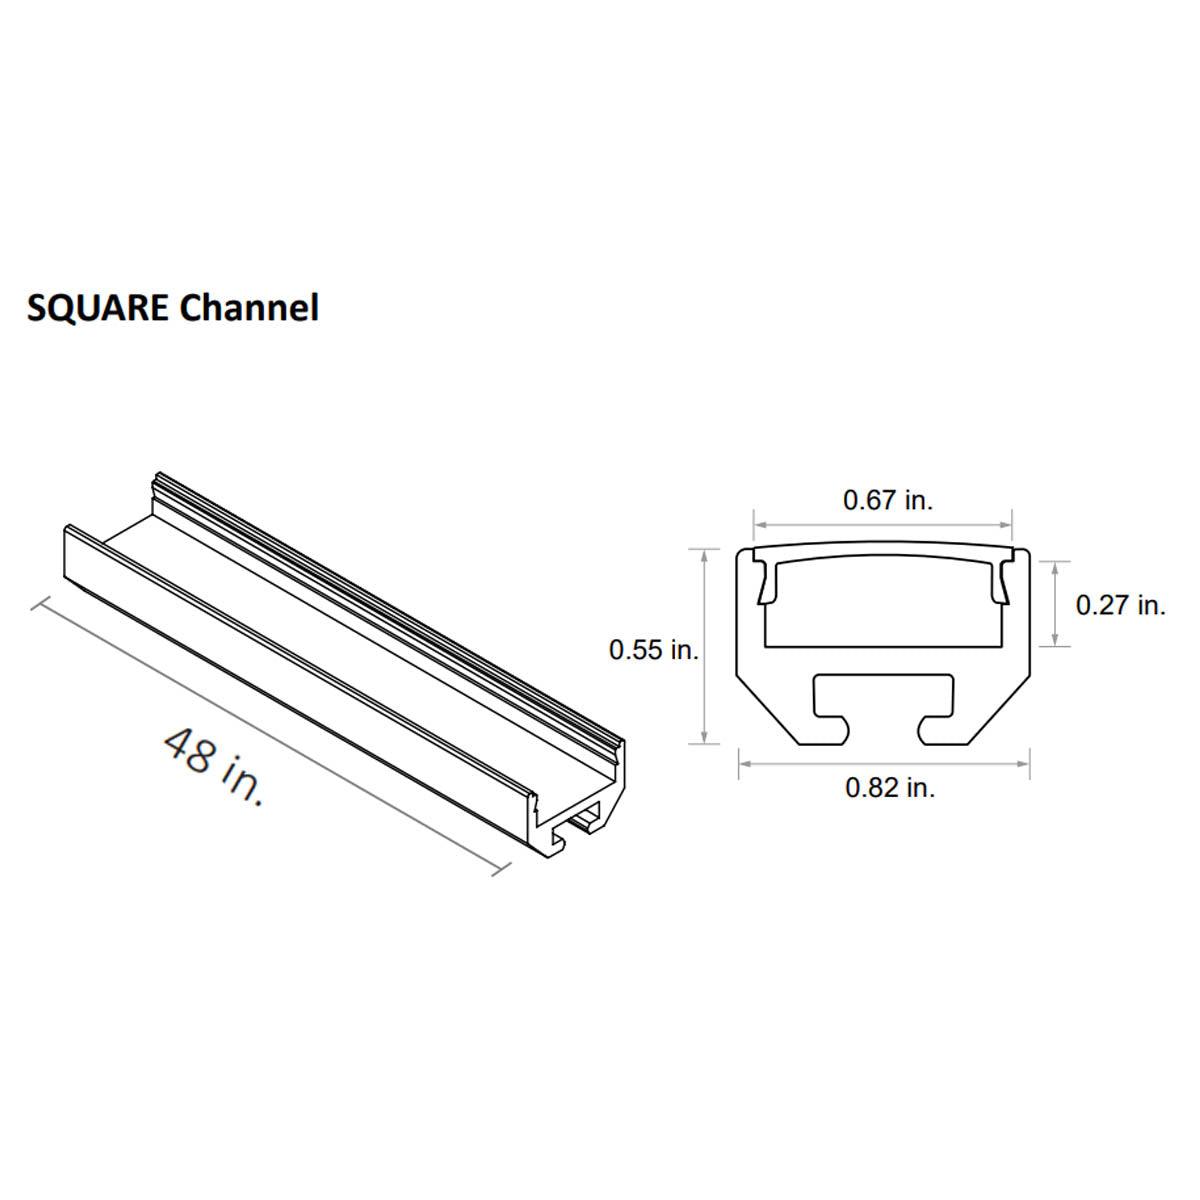 48in. Chromapath Builder, Square White LED Channels for 12mm strip lights